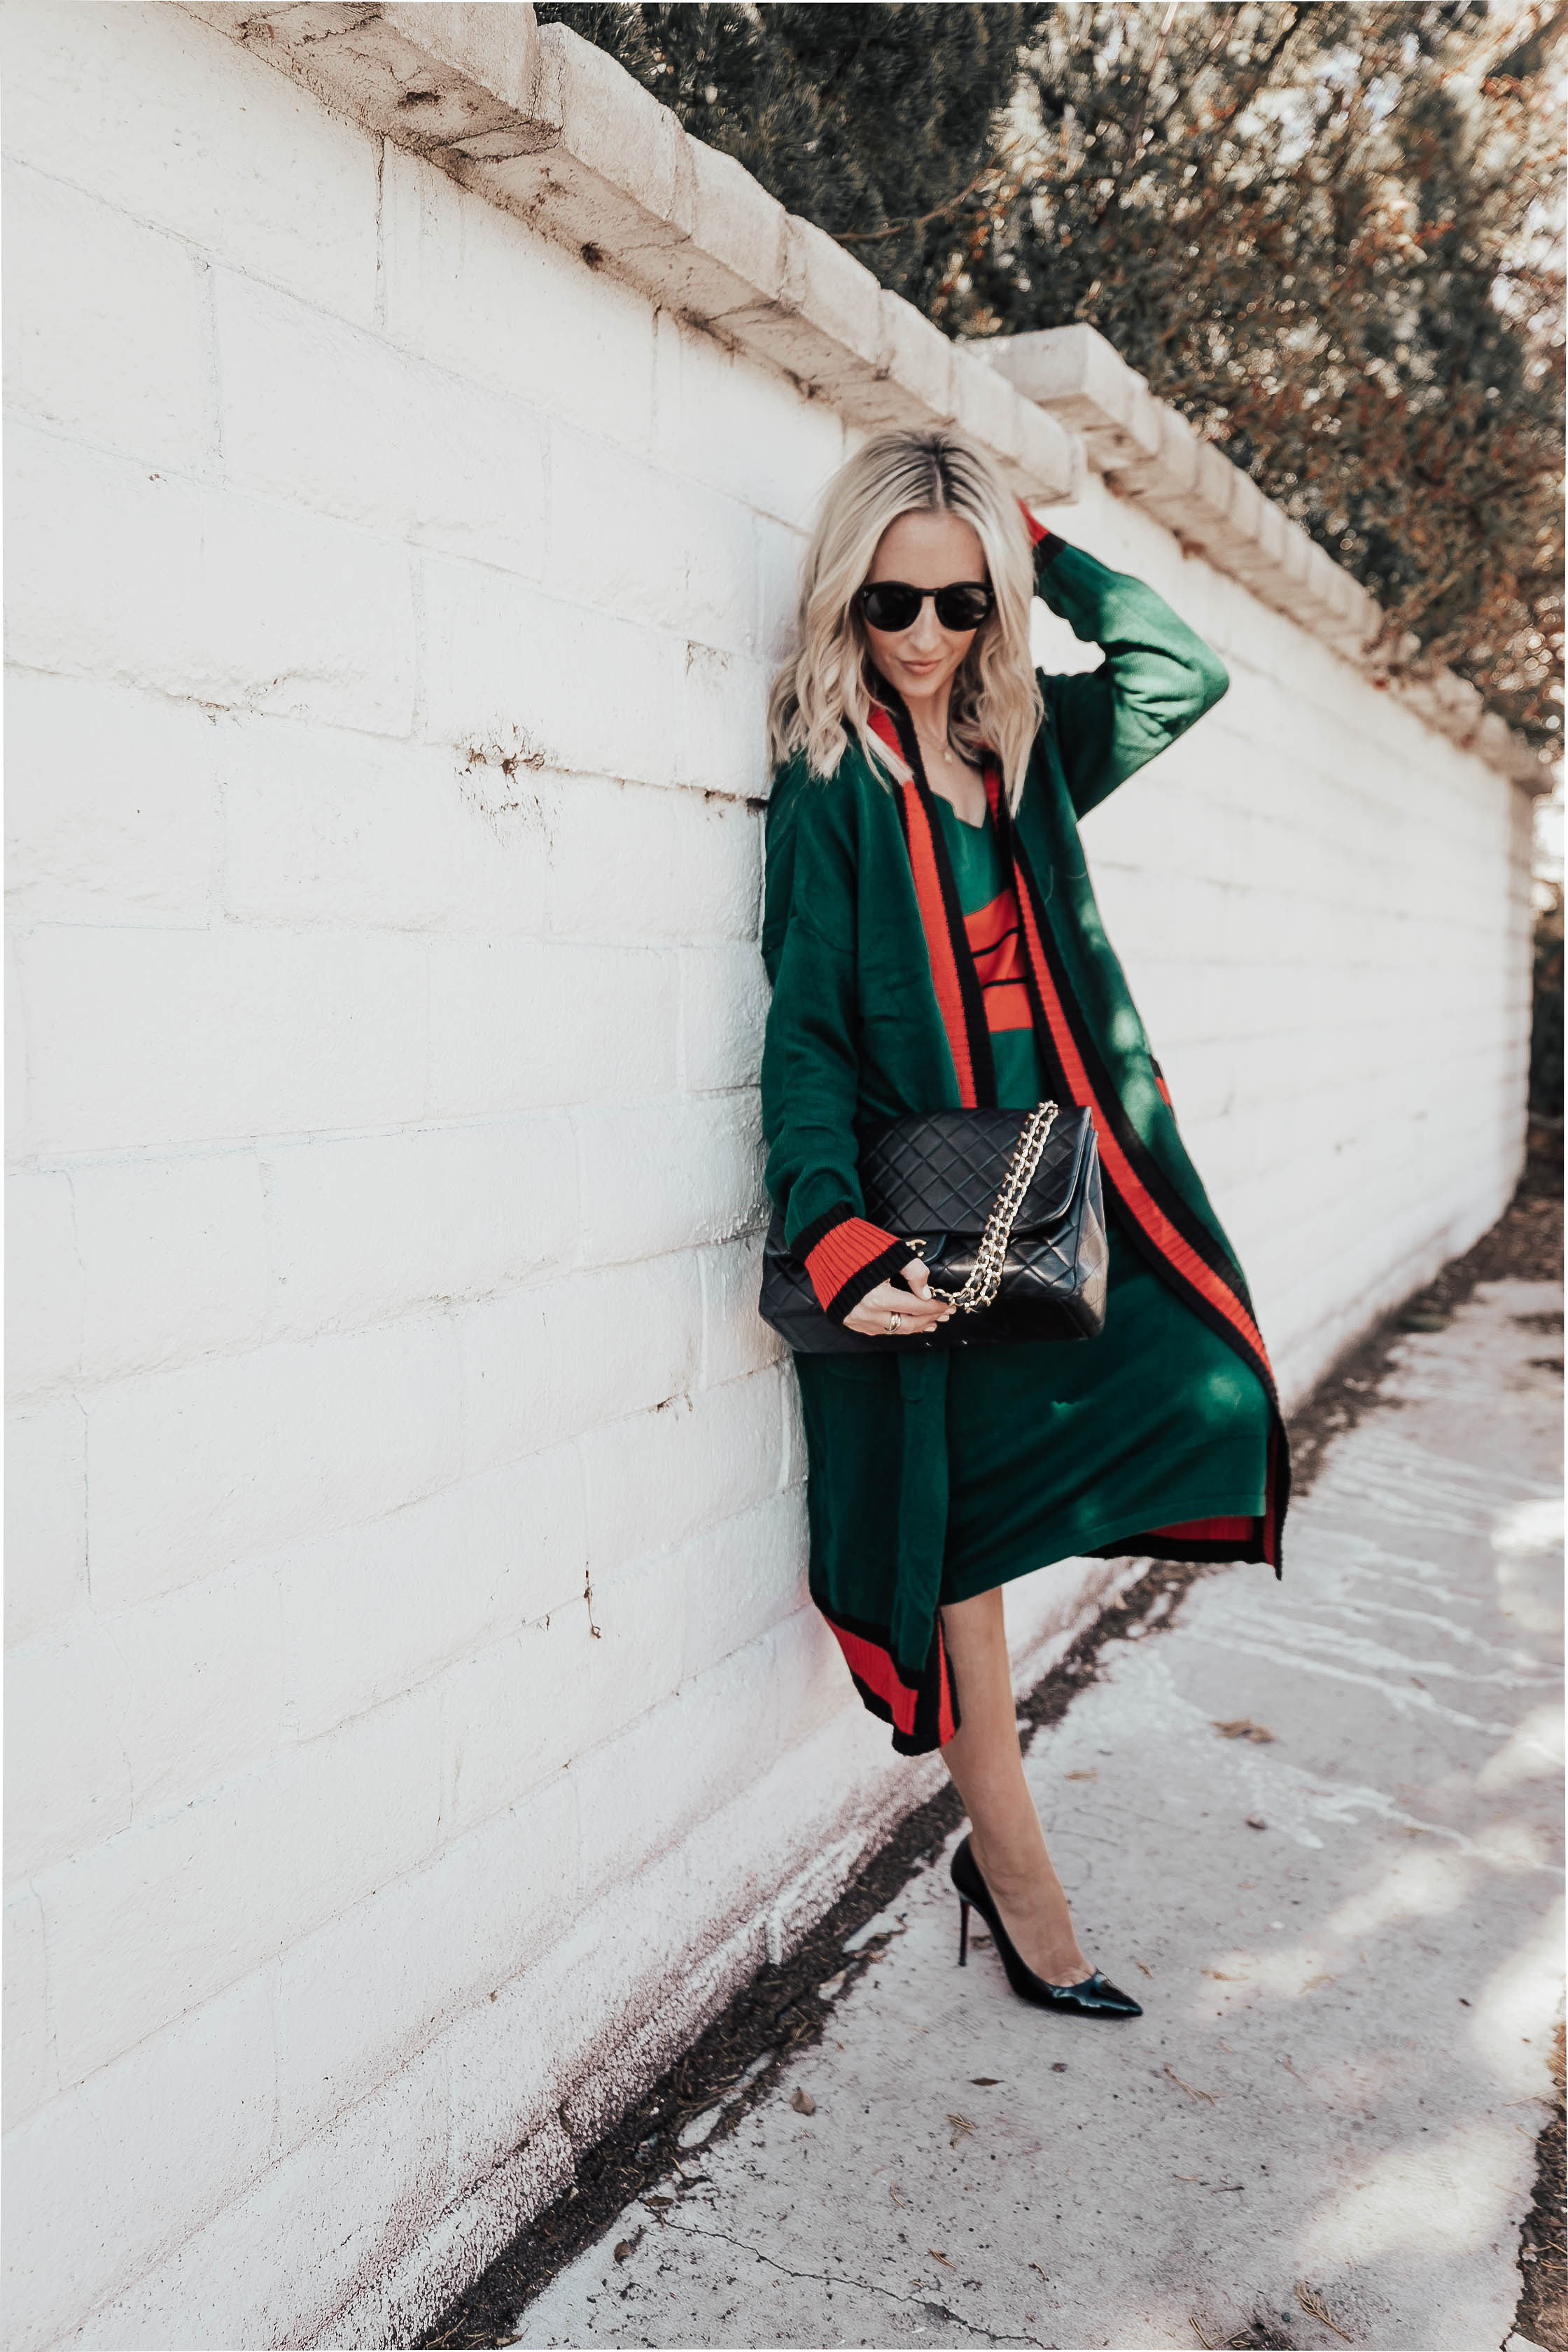 Reno Nevada Blogger, Emily Faren Wieczorek of Two Peas in a Prada shares her Best Sellers - February 2019 - from her gucci belt to $35 sheets - there is something for everyone! 